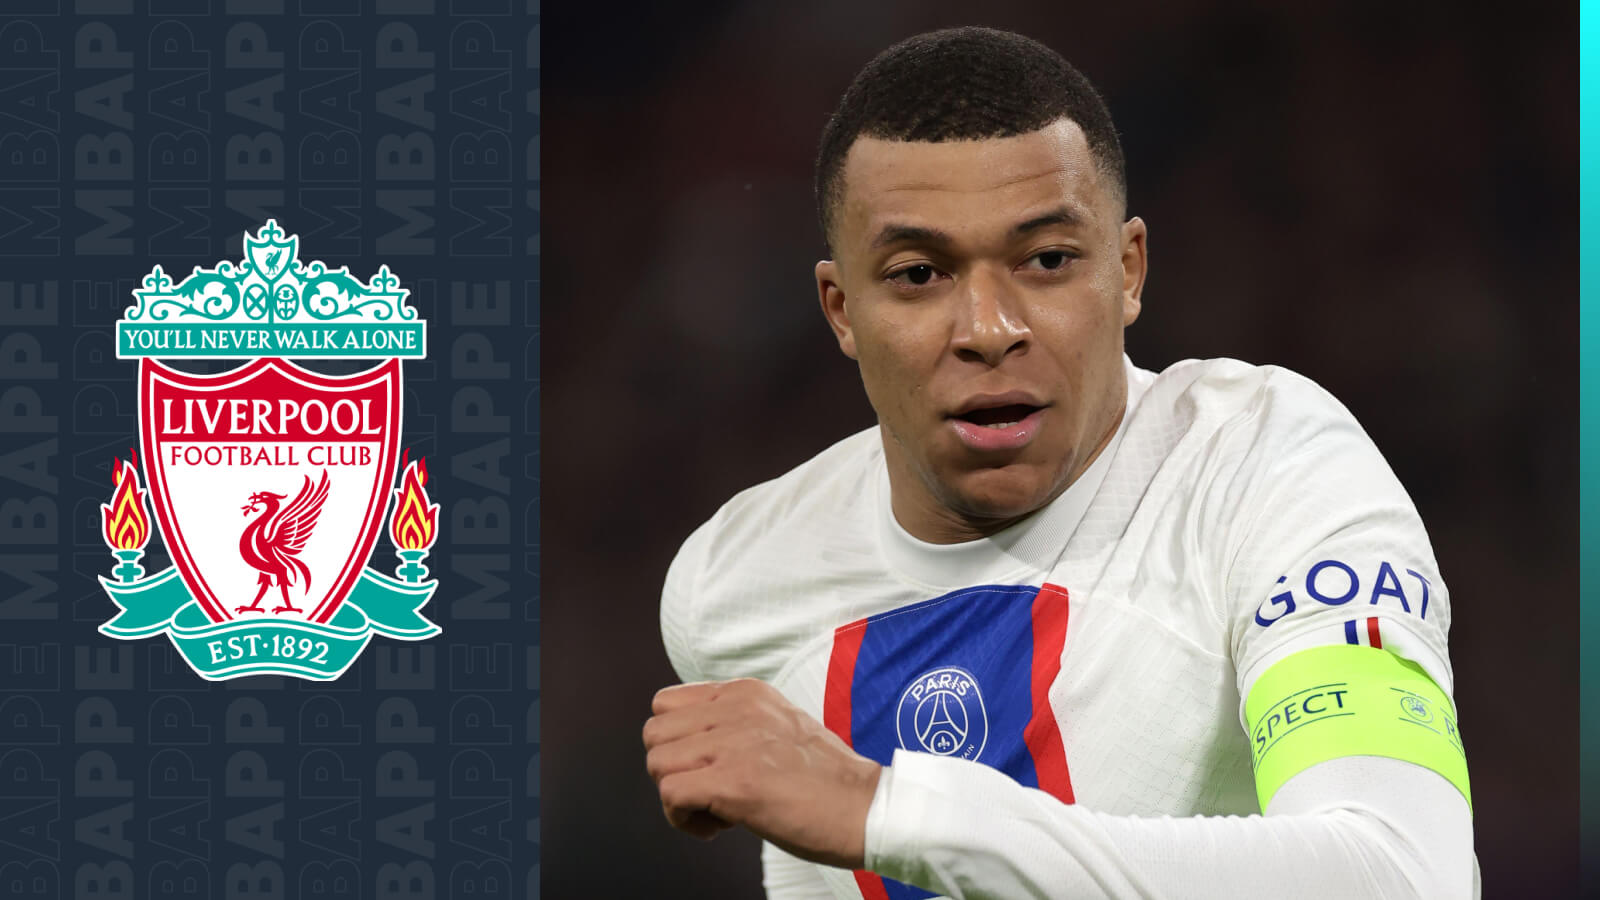 FACT CHECK: Has Liverpool Entered The Race For Kylian Mbappe?